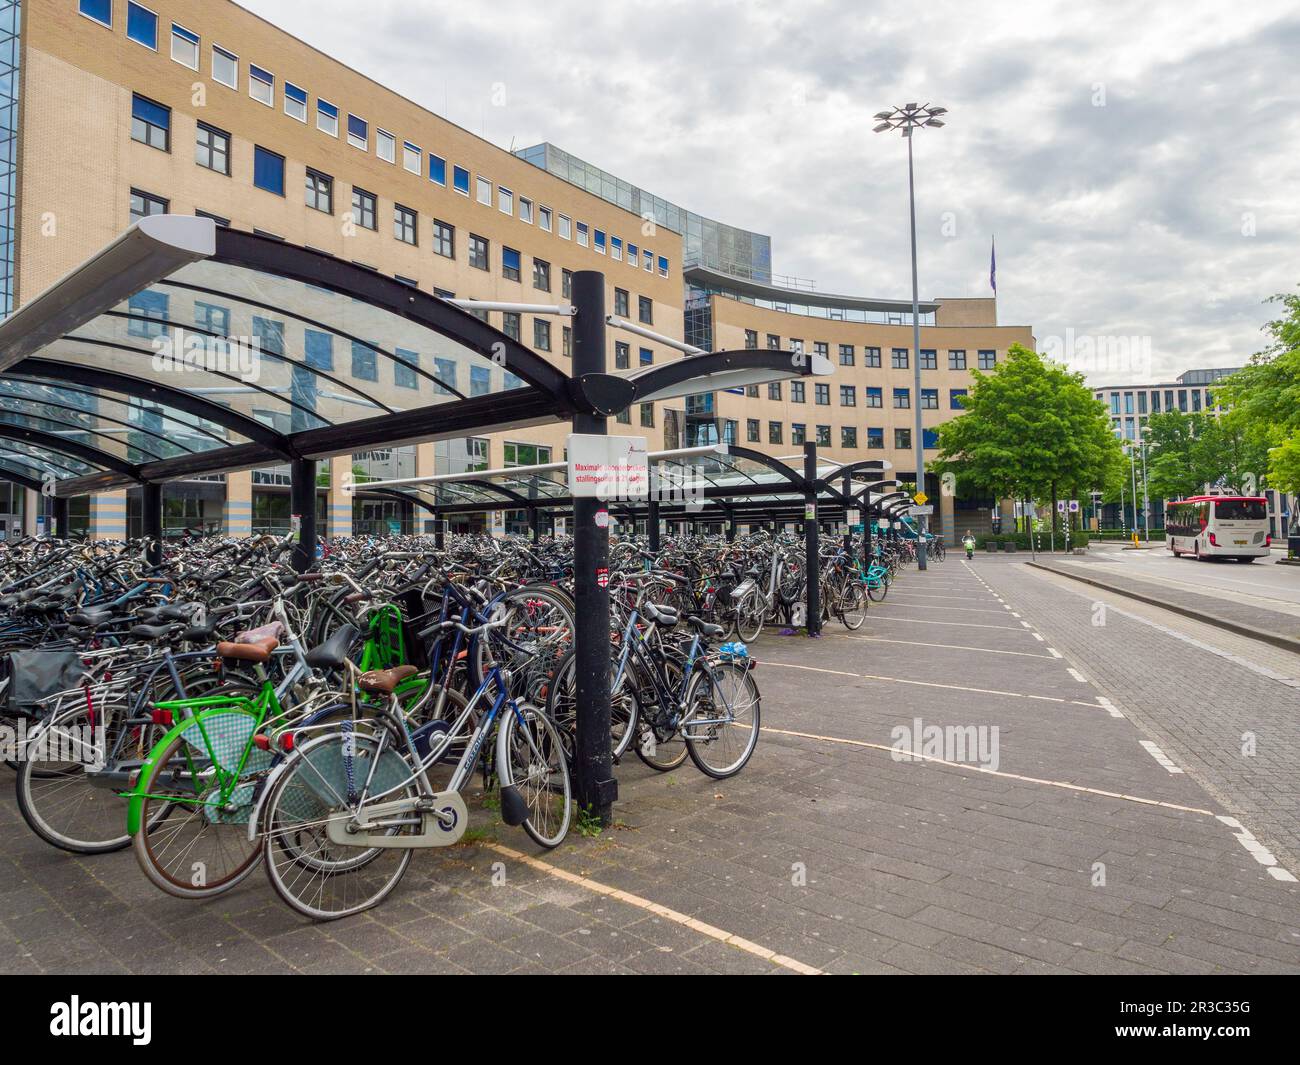 Hundreds of bicycles parked up under a shelter outside Amersfoort Central railway station, Netherlands, Europe. Stock Photo